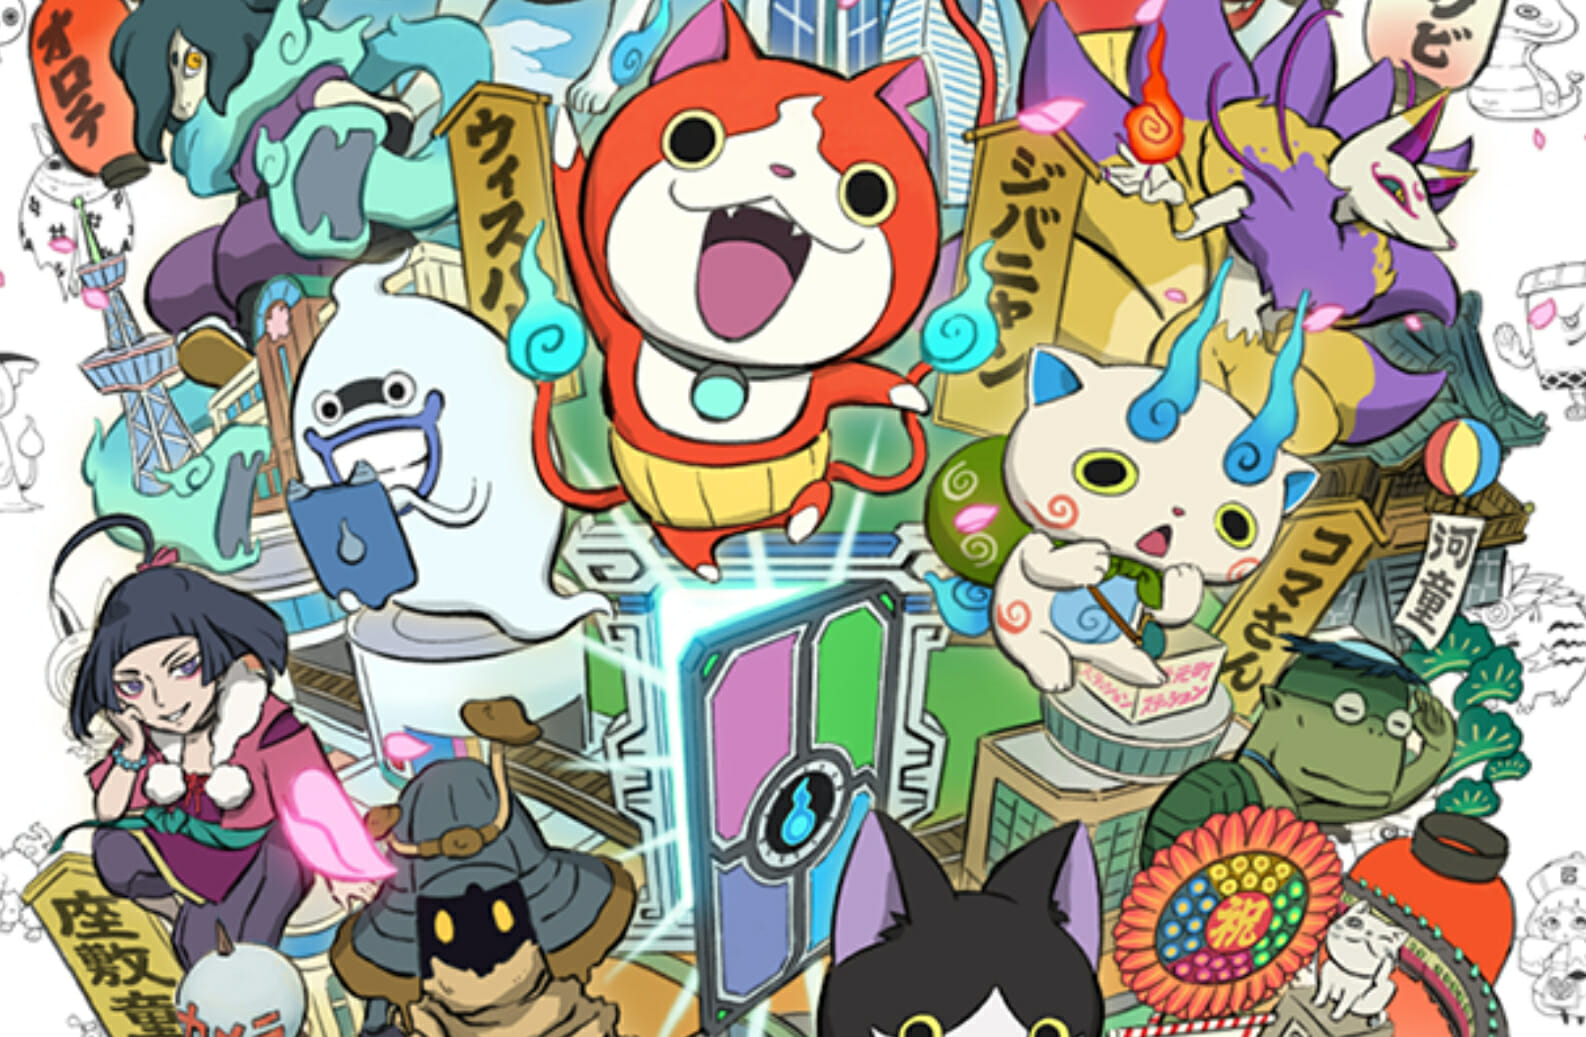 Yo-Kai Watch 4 Gets a 37 Minute Gameplay Showcase Ahead of Its Japanese Rel...